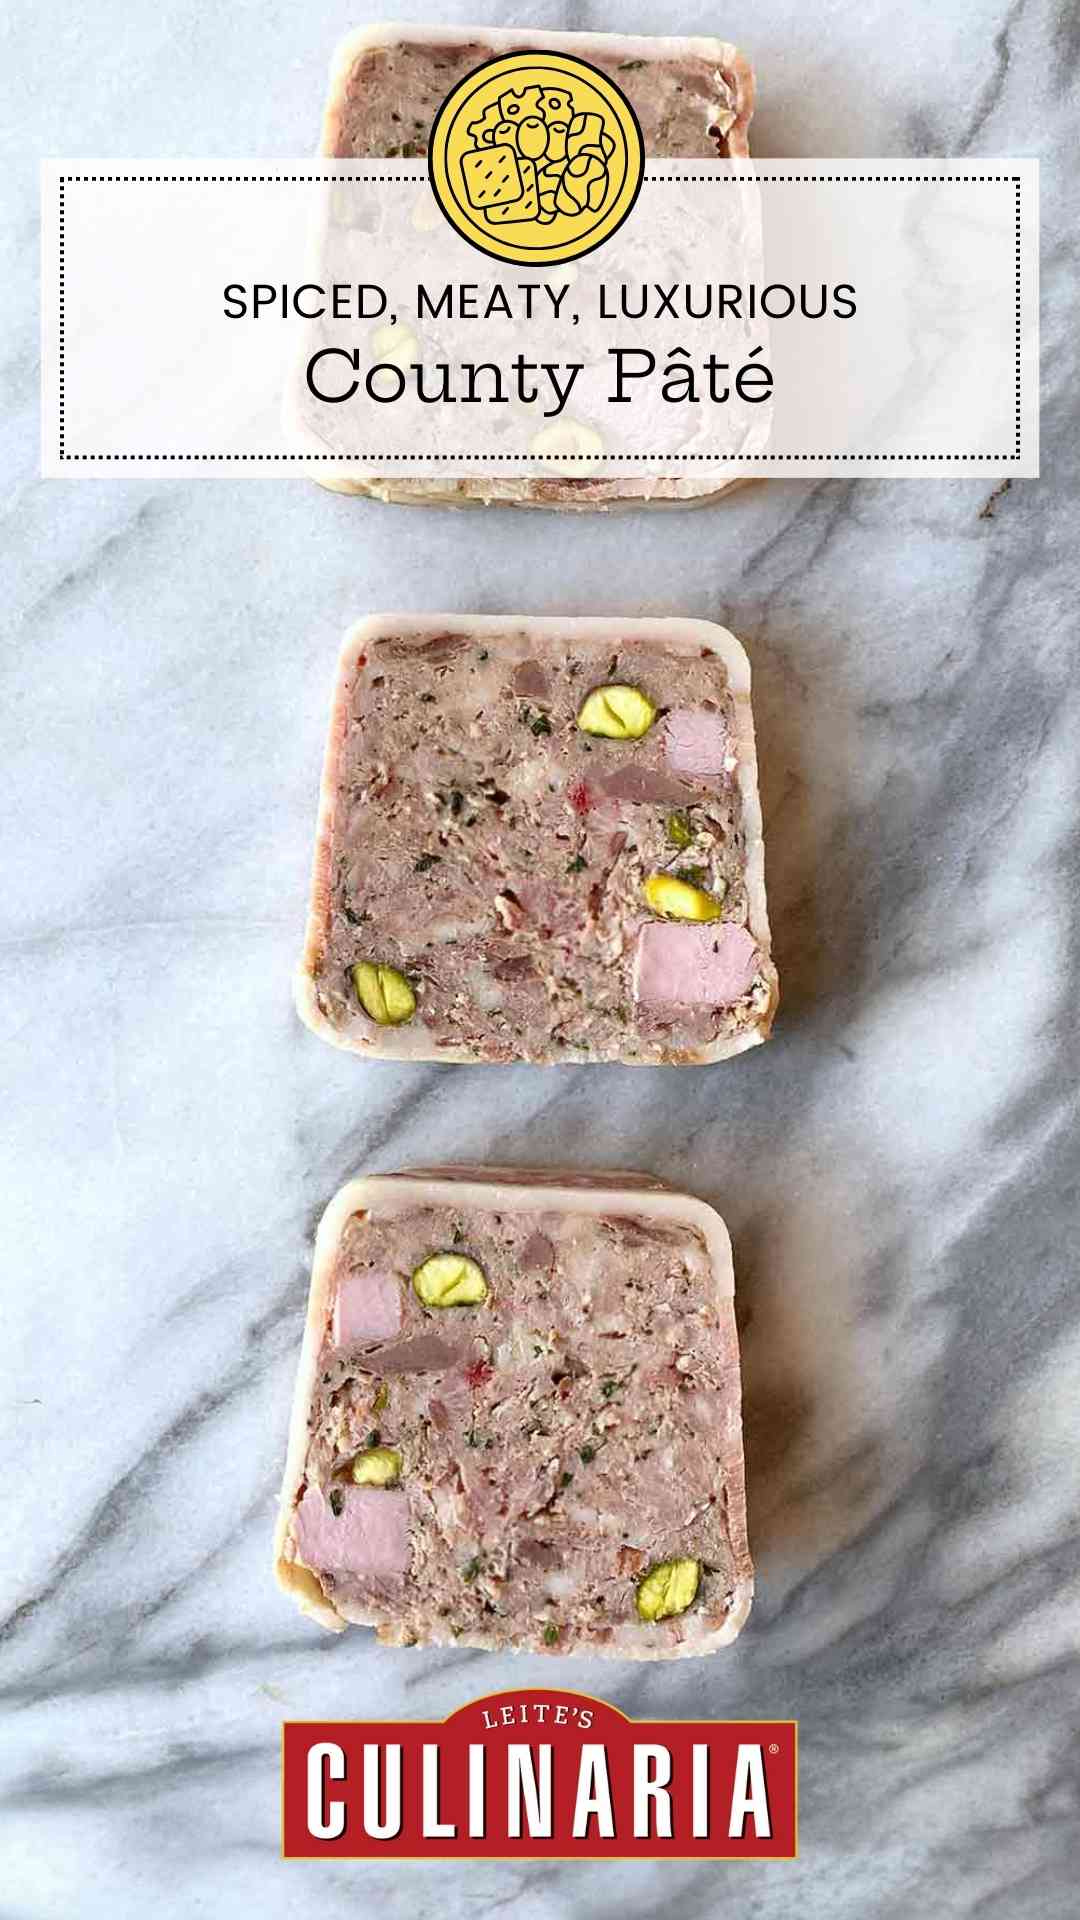 Three slices of country pate on a marble surface.